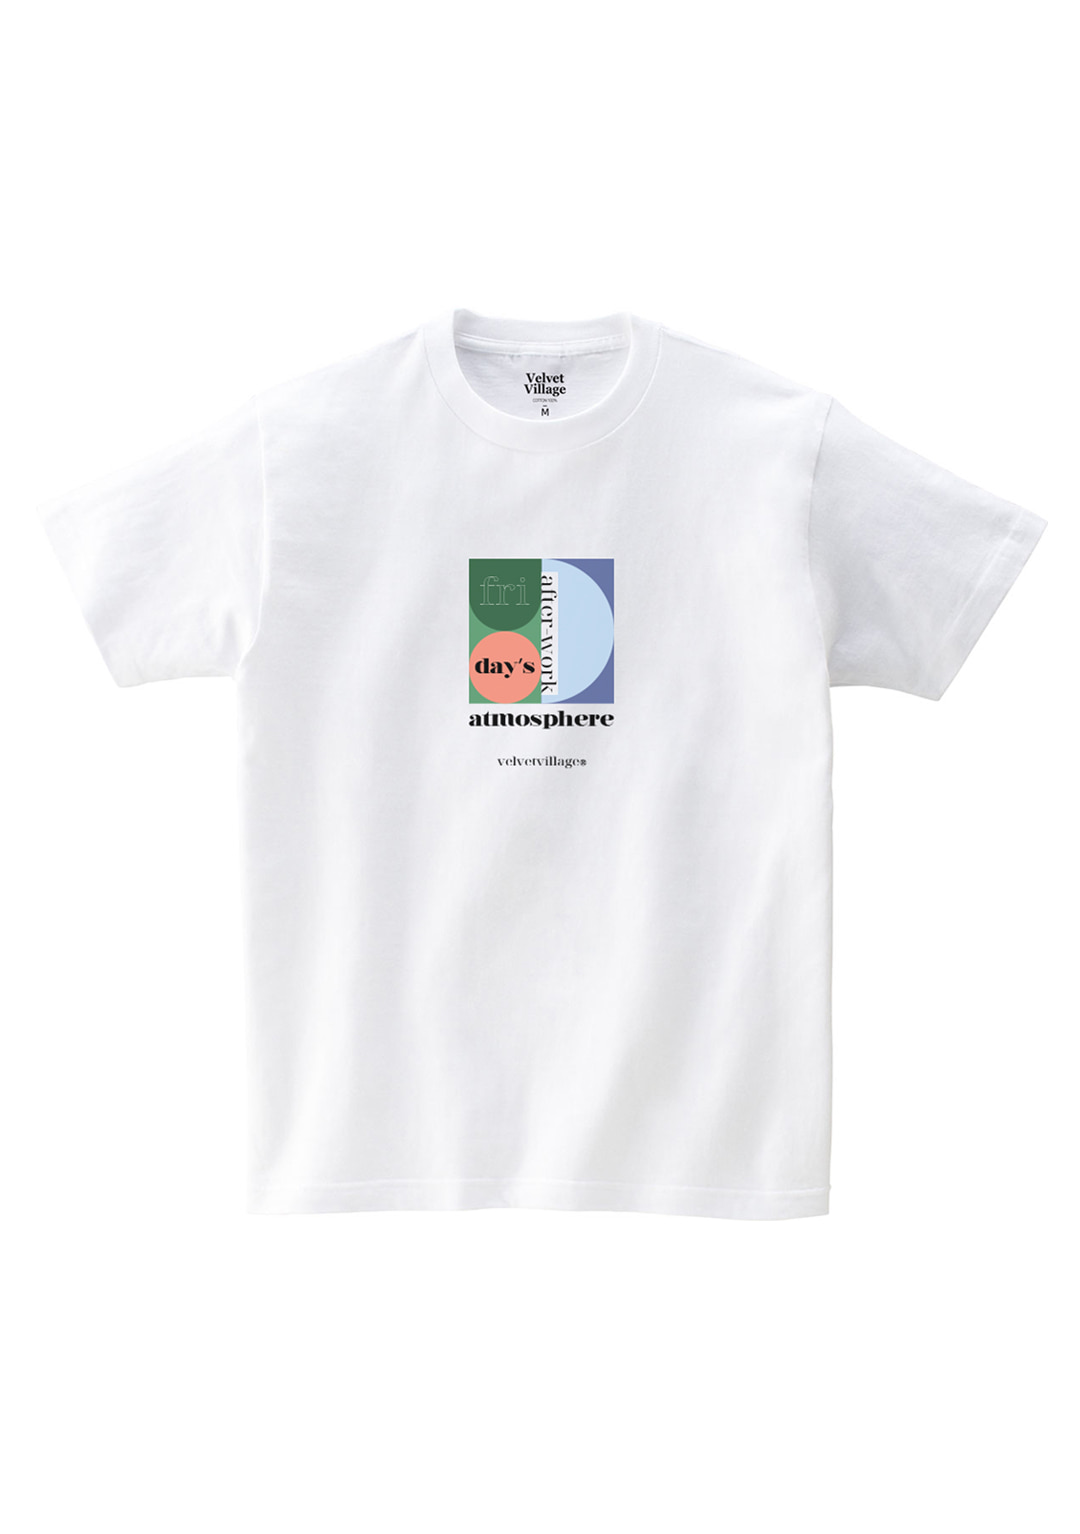 Atmosphere T-shirts (White)